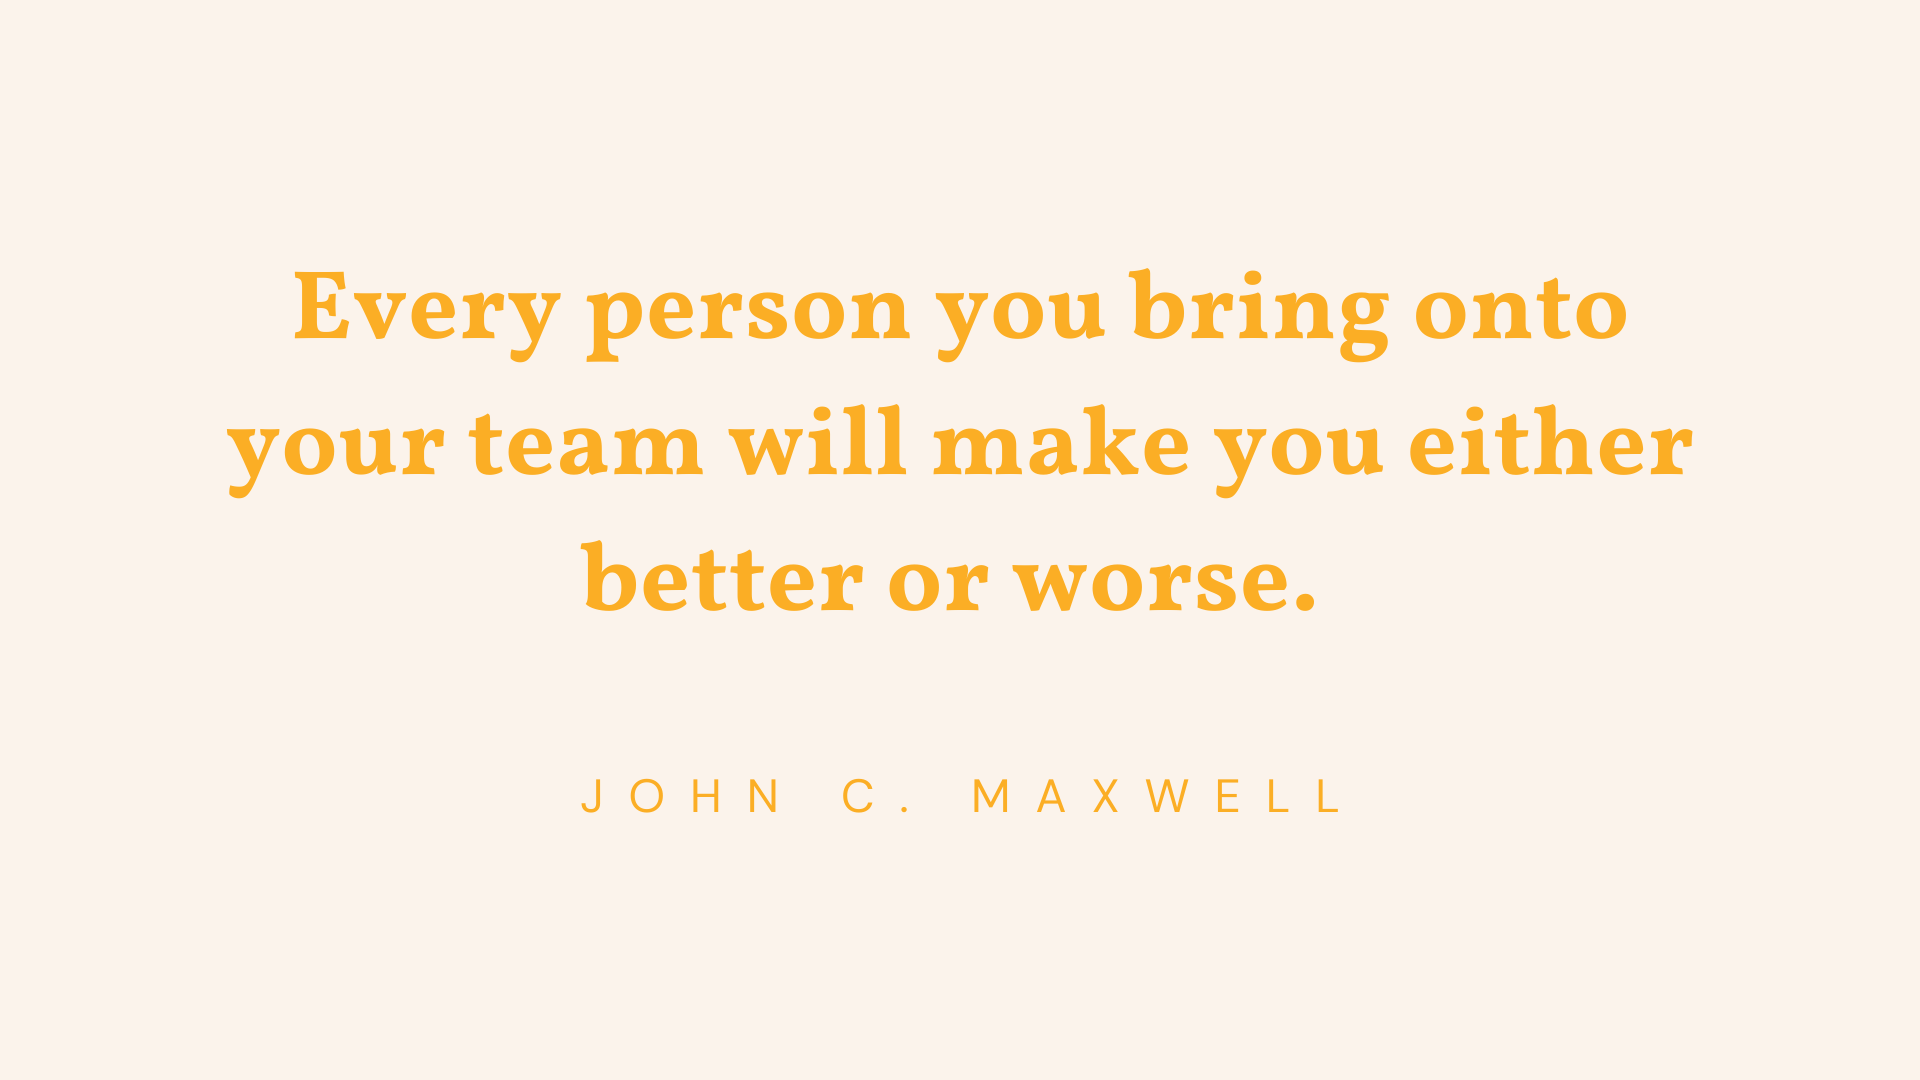 john c. maxwell quote about leadership potential